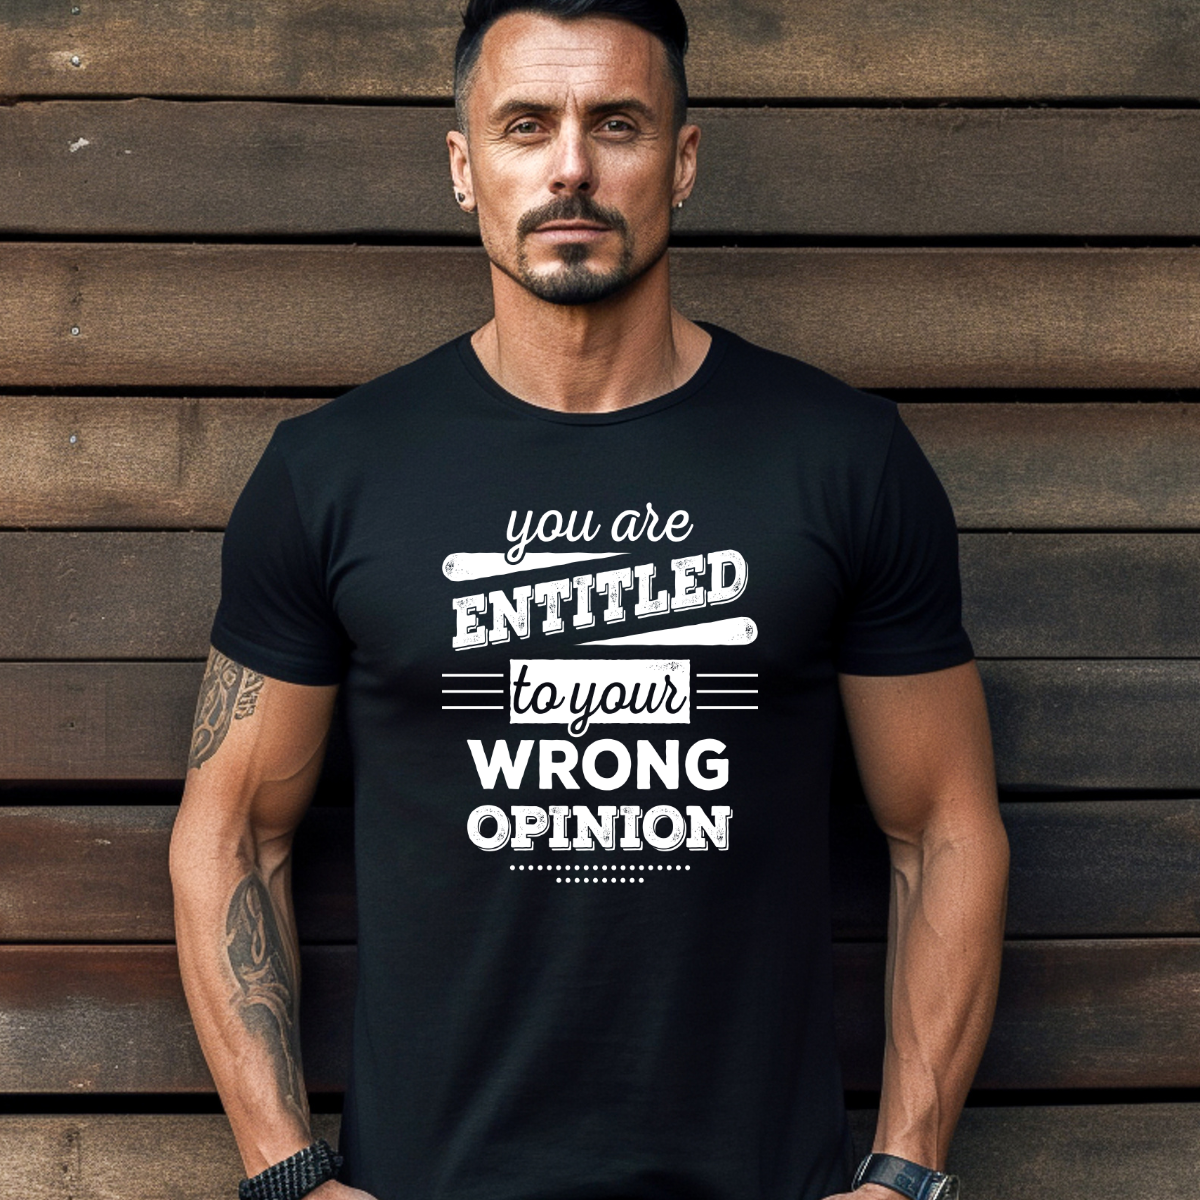 You Are Entitled to Your Wrong Opinion Tee